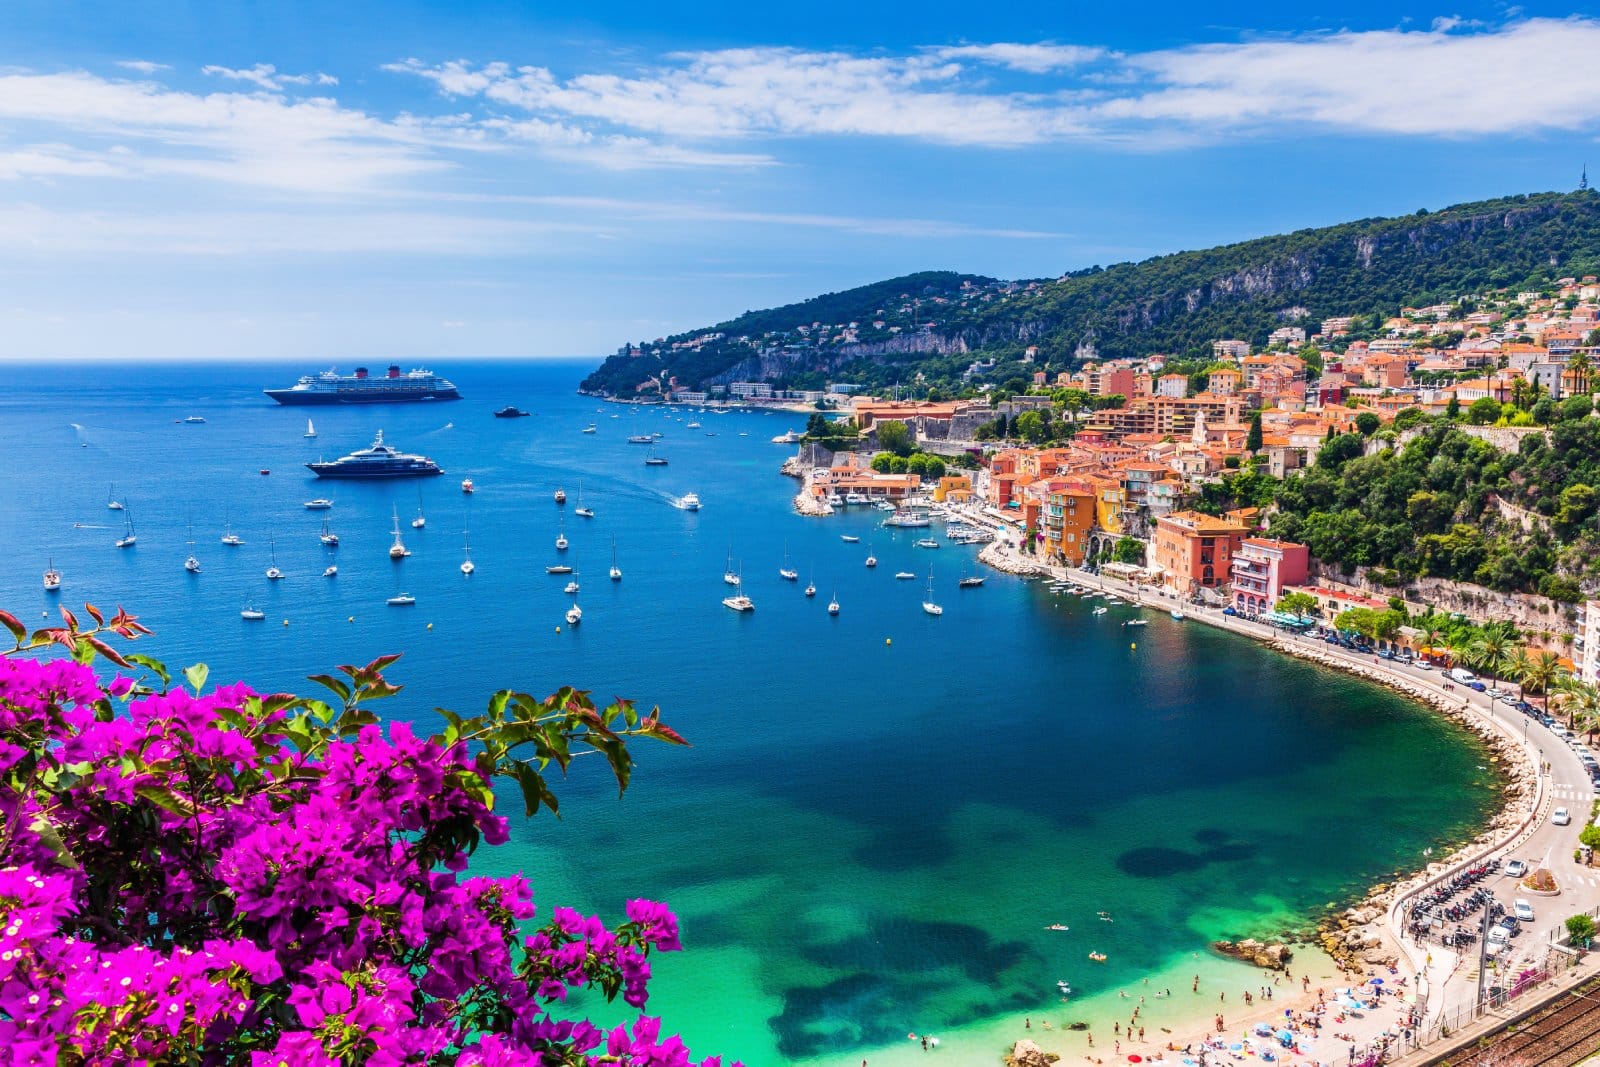 <p><span>The French Riviera, or Côte d’Azur, is synonymous with yachting glamour. This iconic coastline, stretching from Saint-Tropez to Monaco, is dotted with luxurious marinas, stunning beaches, and chic seaside towns.</span></p> <p><span>Yachting in the French Riviera offers a chance to bask in the Mediterranean sun, explore hidden coves, and indulge in the region’s exquisite cuisine and culture. The Riviera’s azure waters and glamorous ports make it a top destination for the international yachting community.</span></p> <p><b>Insider’s Tip: </b><span>Visit during the Cannes Film Festival or Monaco Grand Prix for a truly glamorous experience.</span></p> <p><b>When To Travel: </b><span>May to September for ideal weather and vibrant social events.</span></p> <p><b>How To Get There: </b><span>Fly into Nice Côte d’Azur Airport and access the marinas by car or helicopter.</span></p>